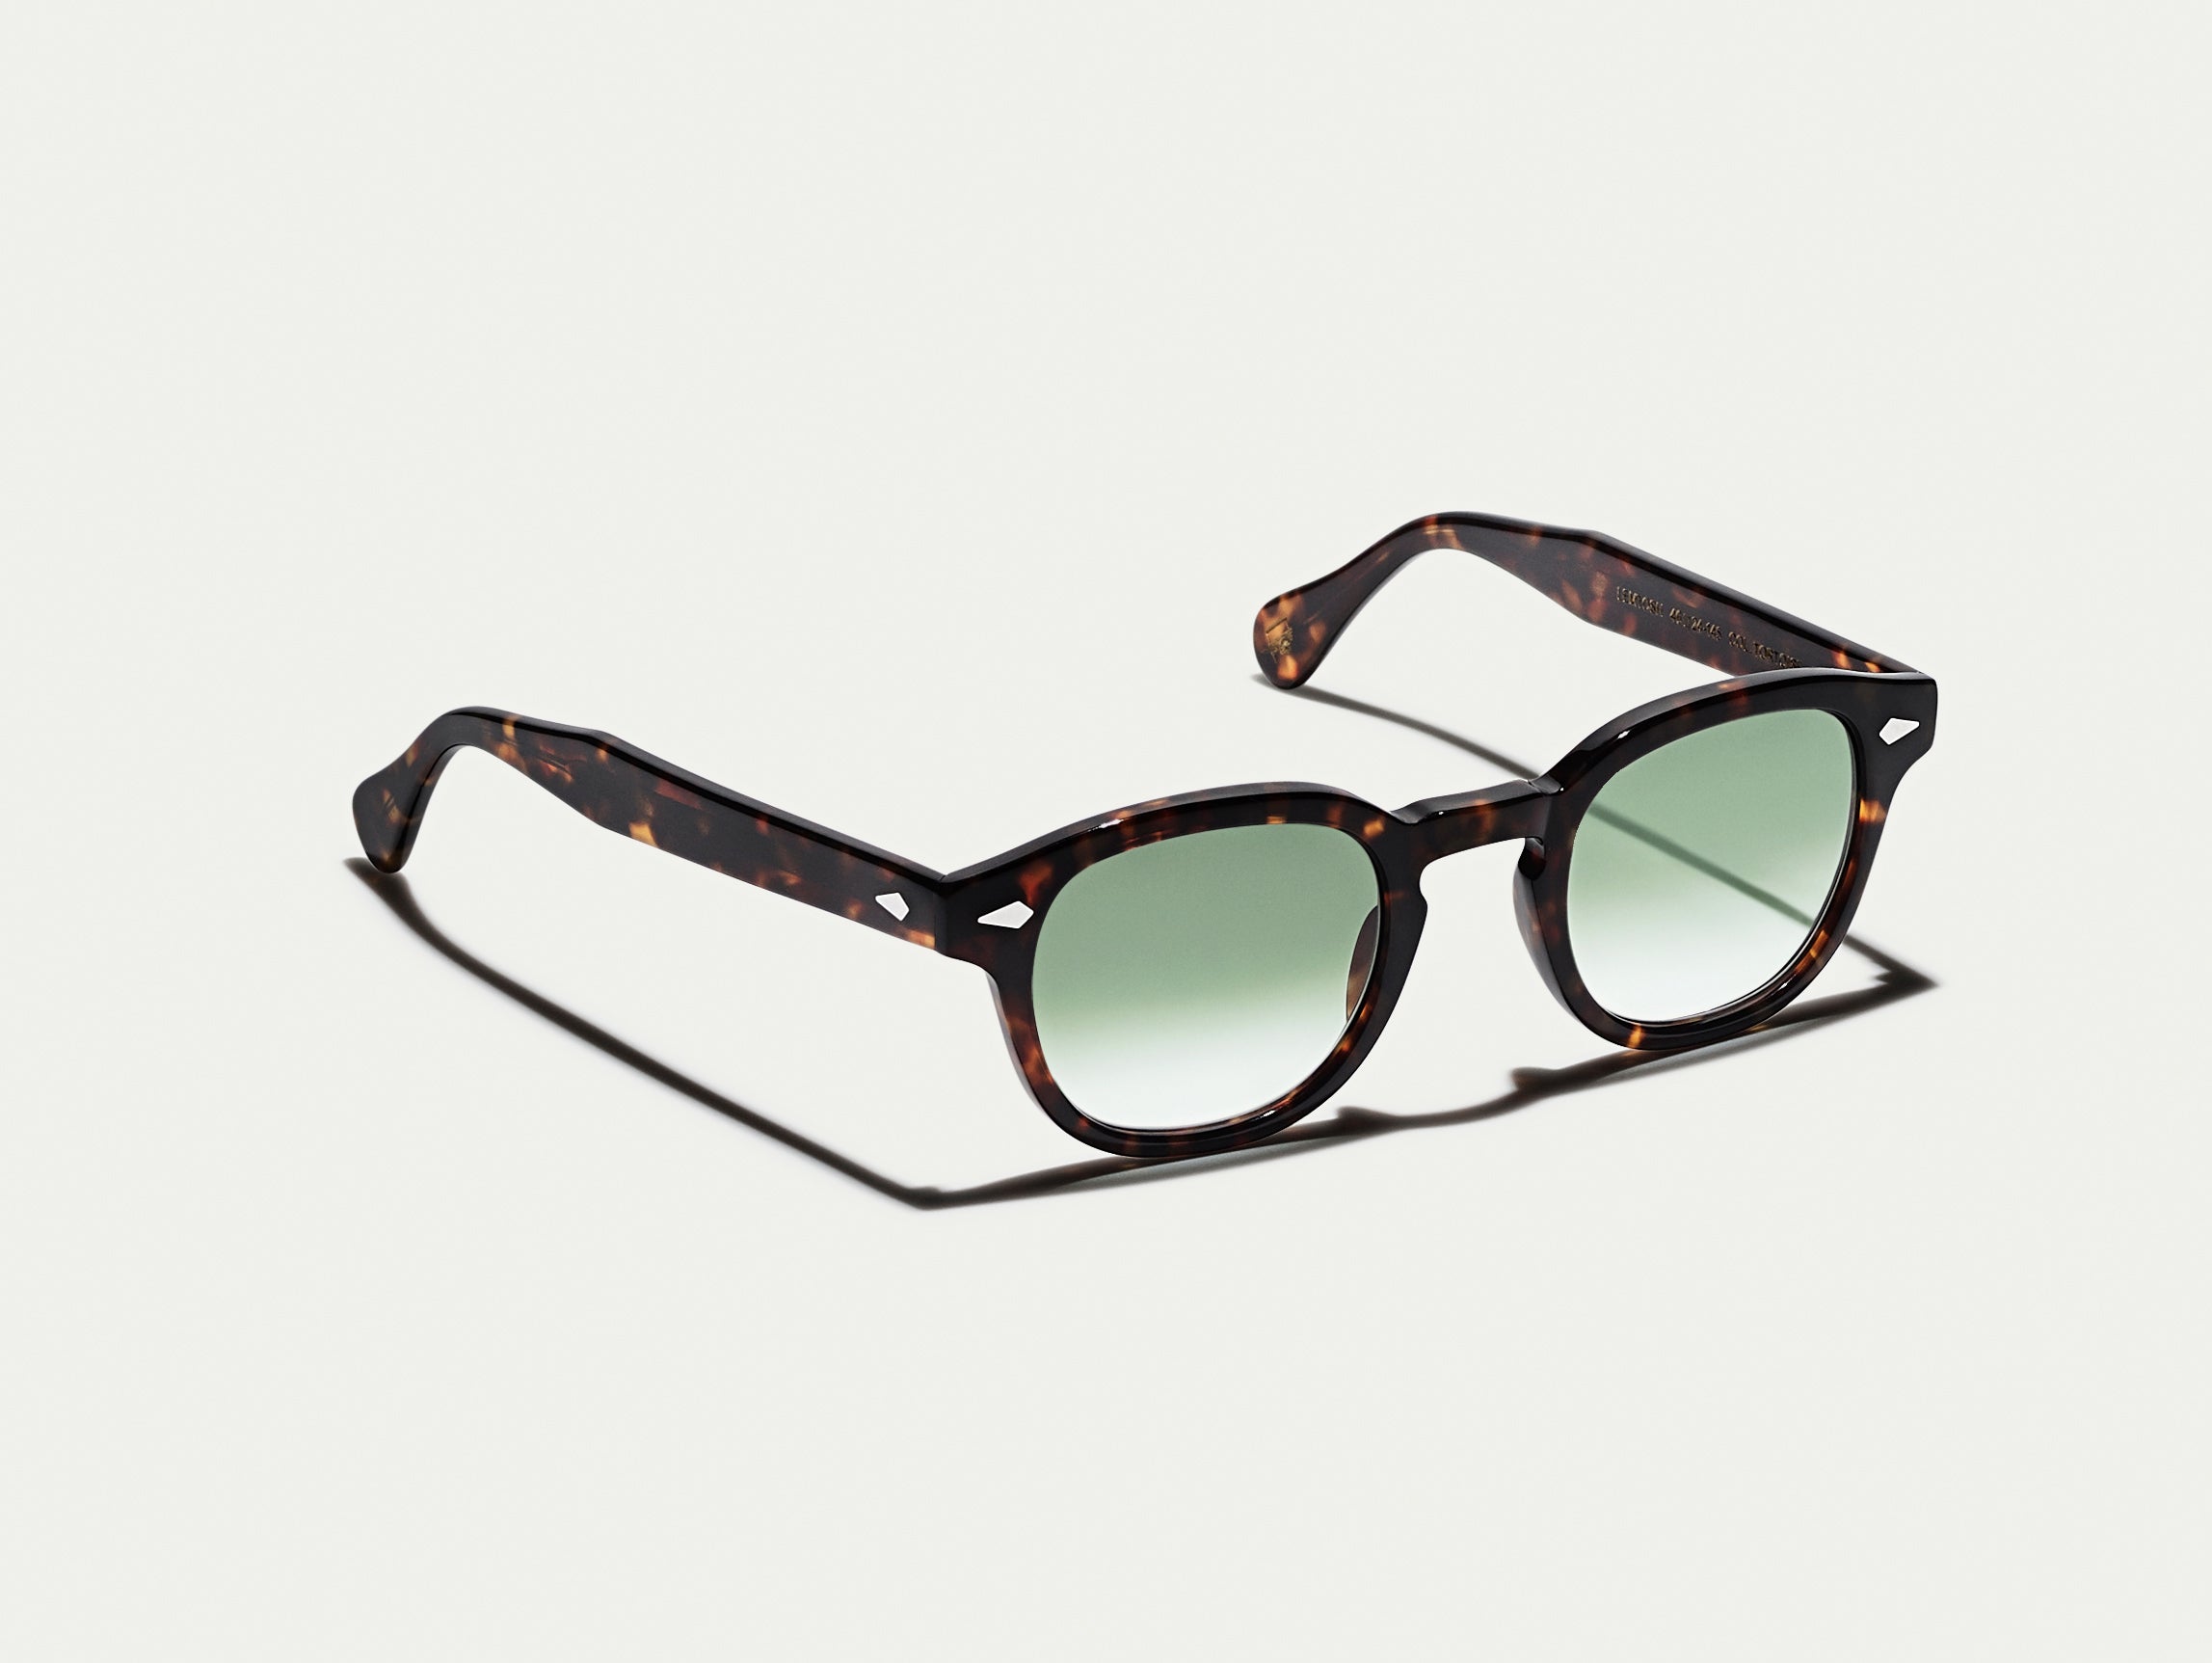 #color_g-15 fade | The LEMTOSH Tortoise with G-15 Fade Tinted Lenses